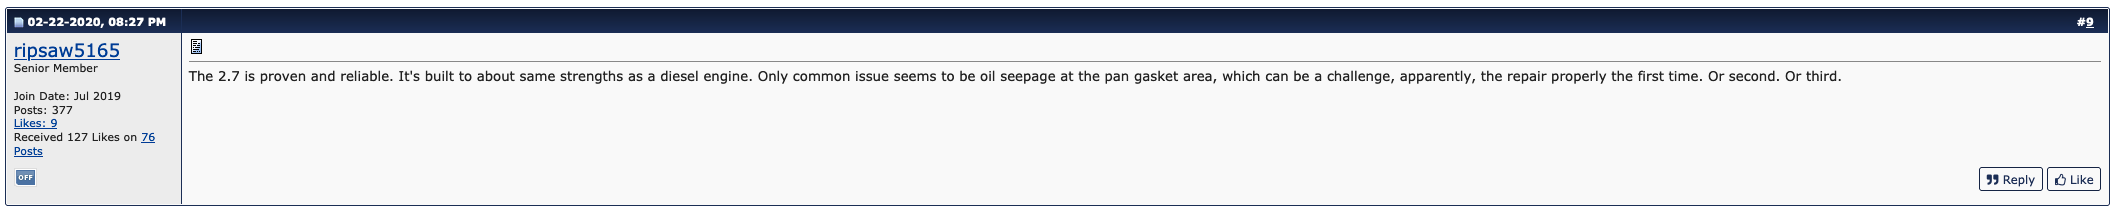 screenshot shows message board thread where owners describe ford's plastic oil pan leaks